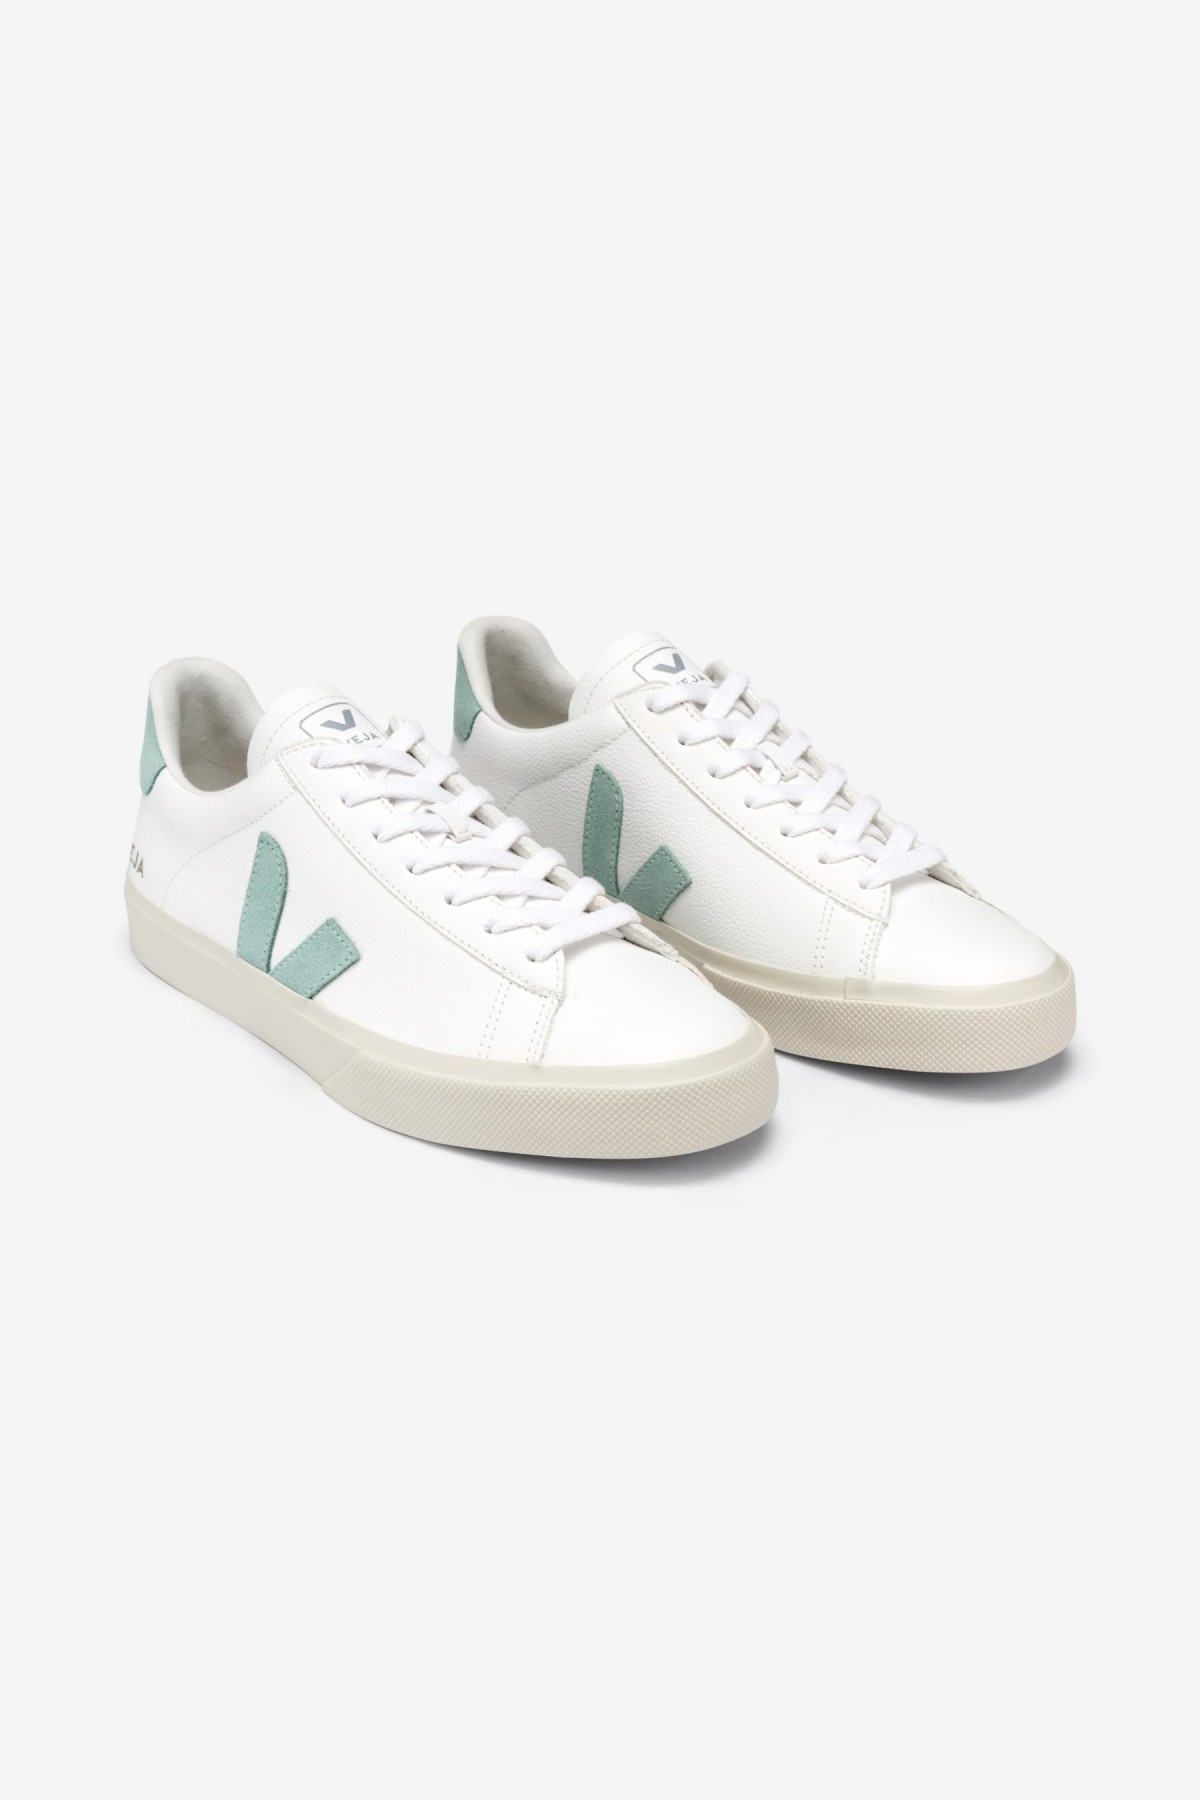 Veja Campo in Extra White Matcha